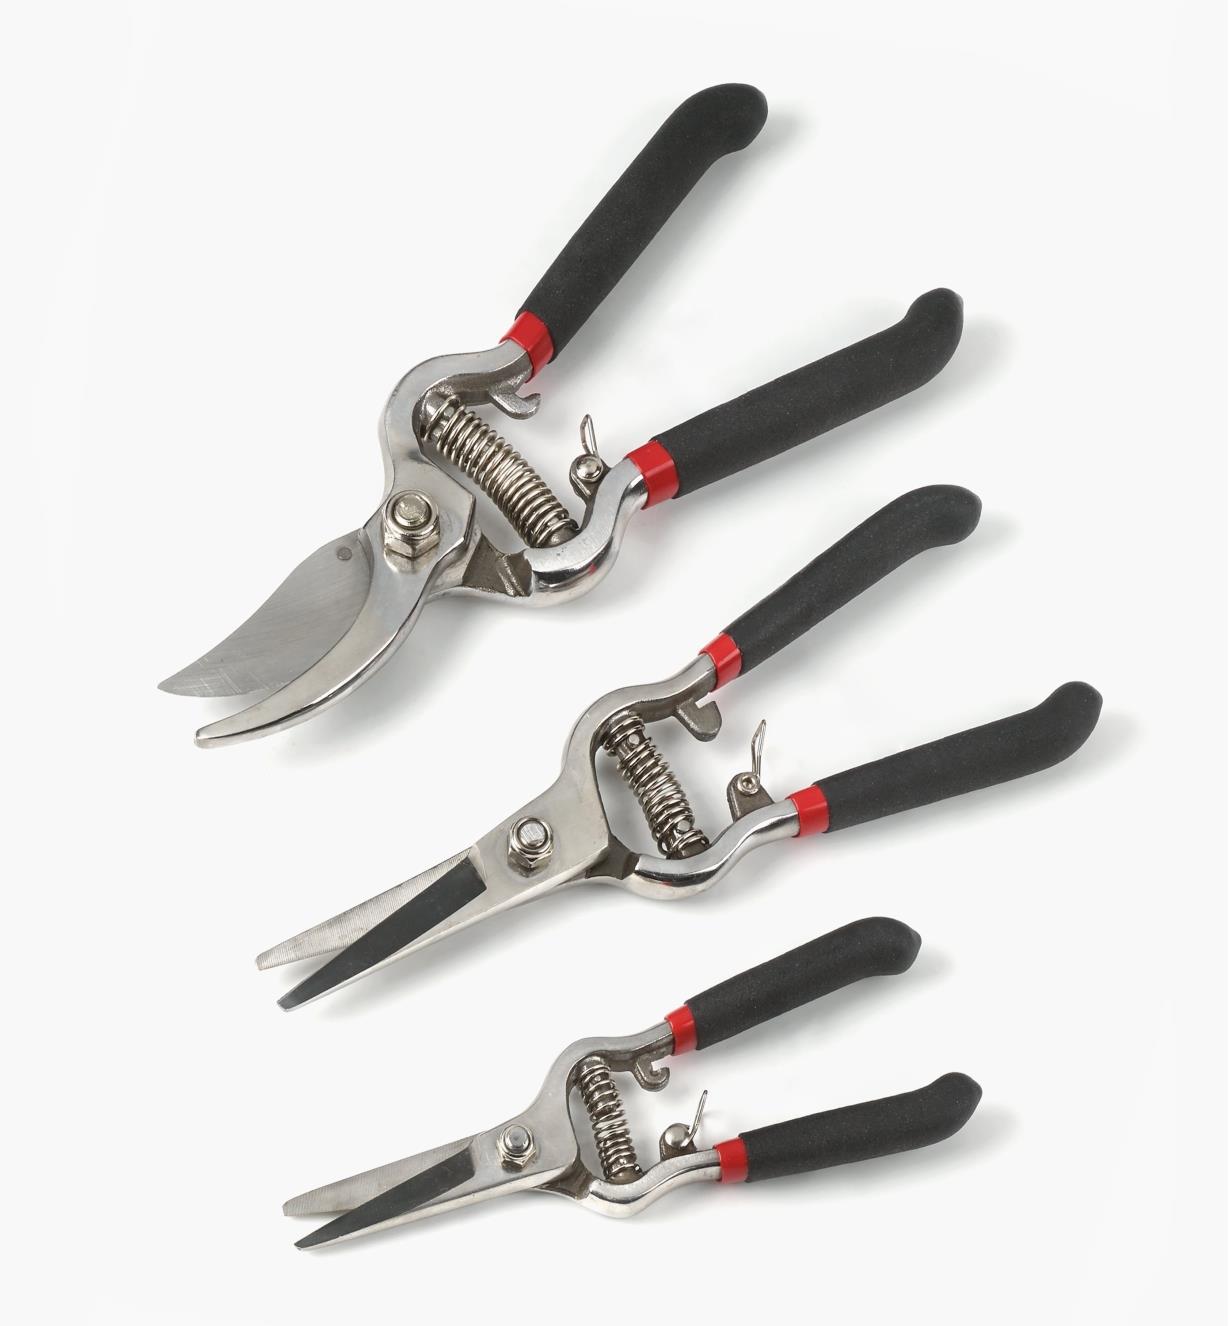 AB553 - Stainless-Steel Pruning Tools, set of 3